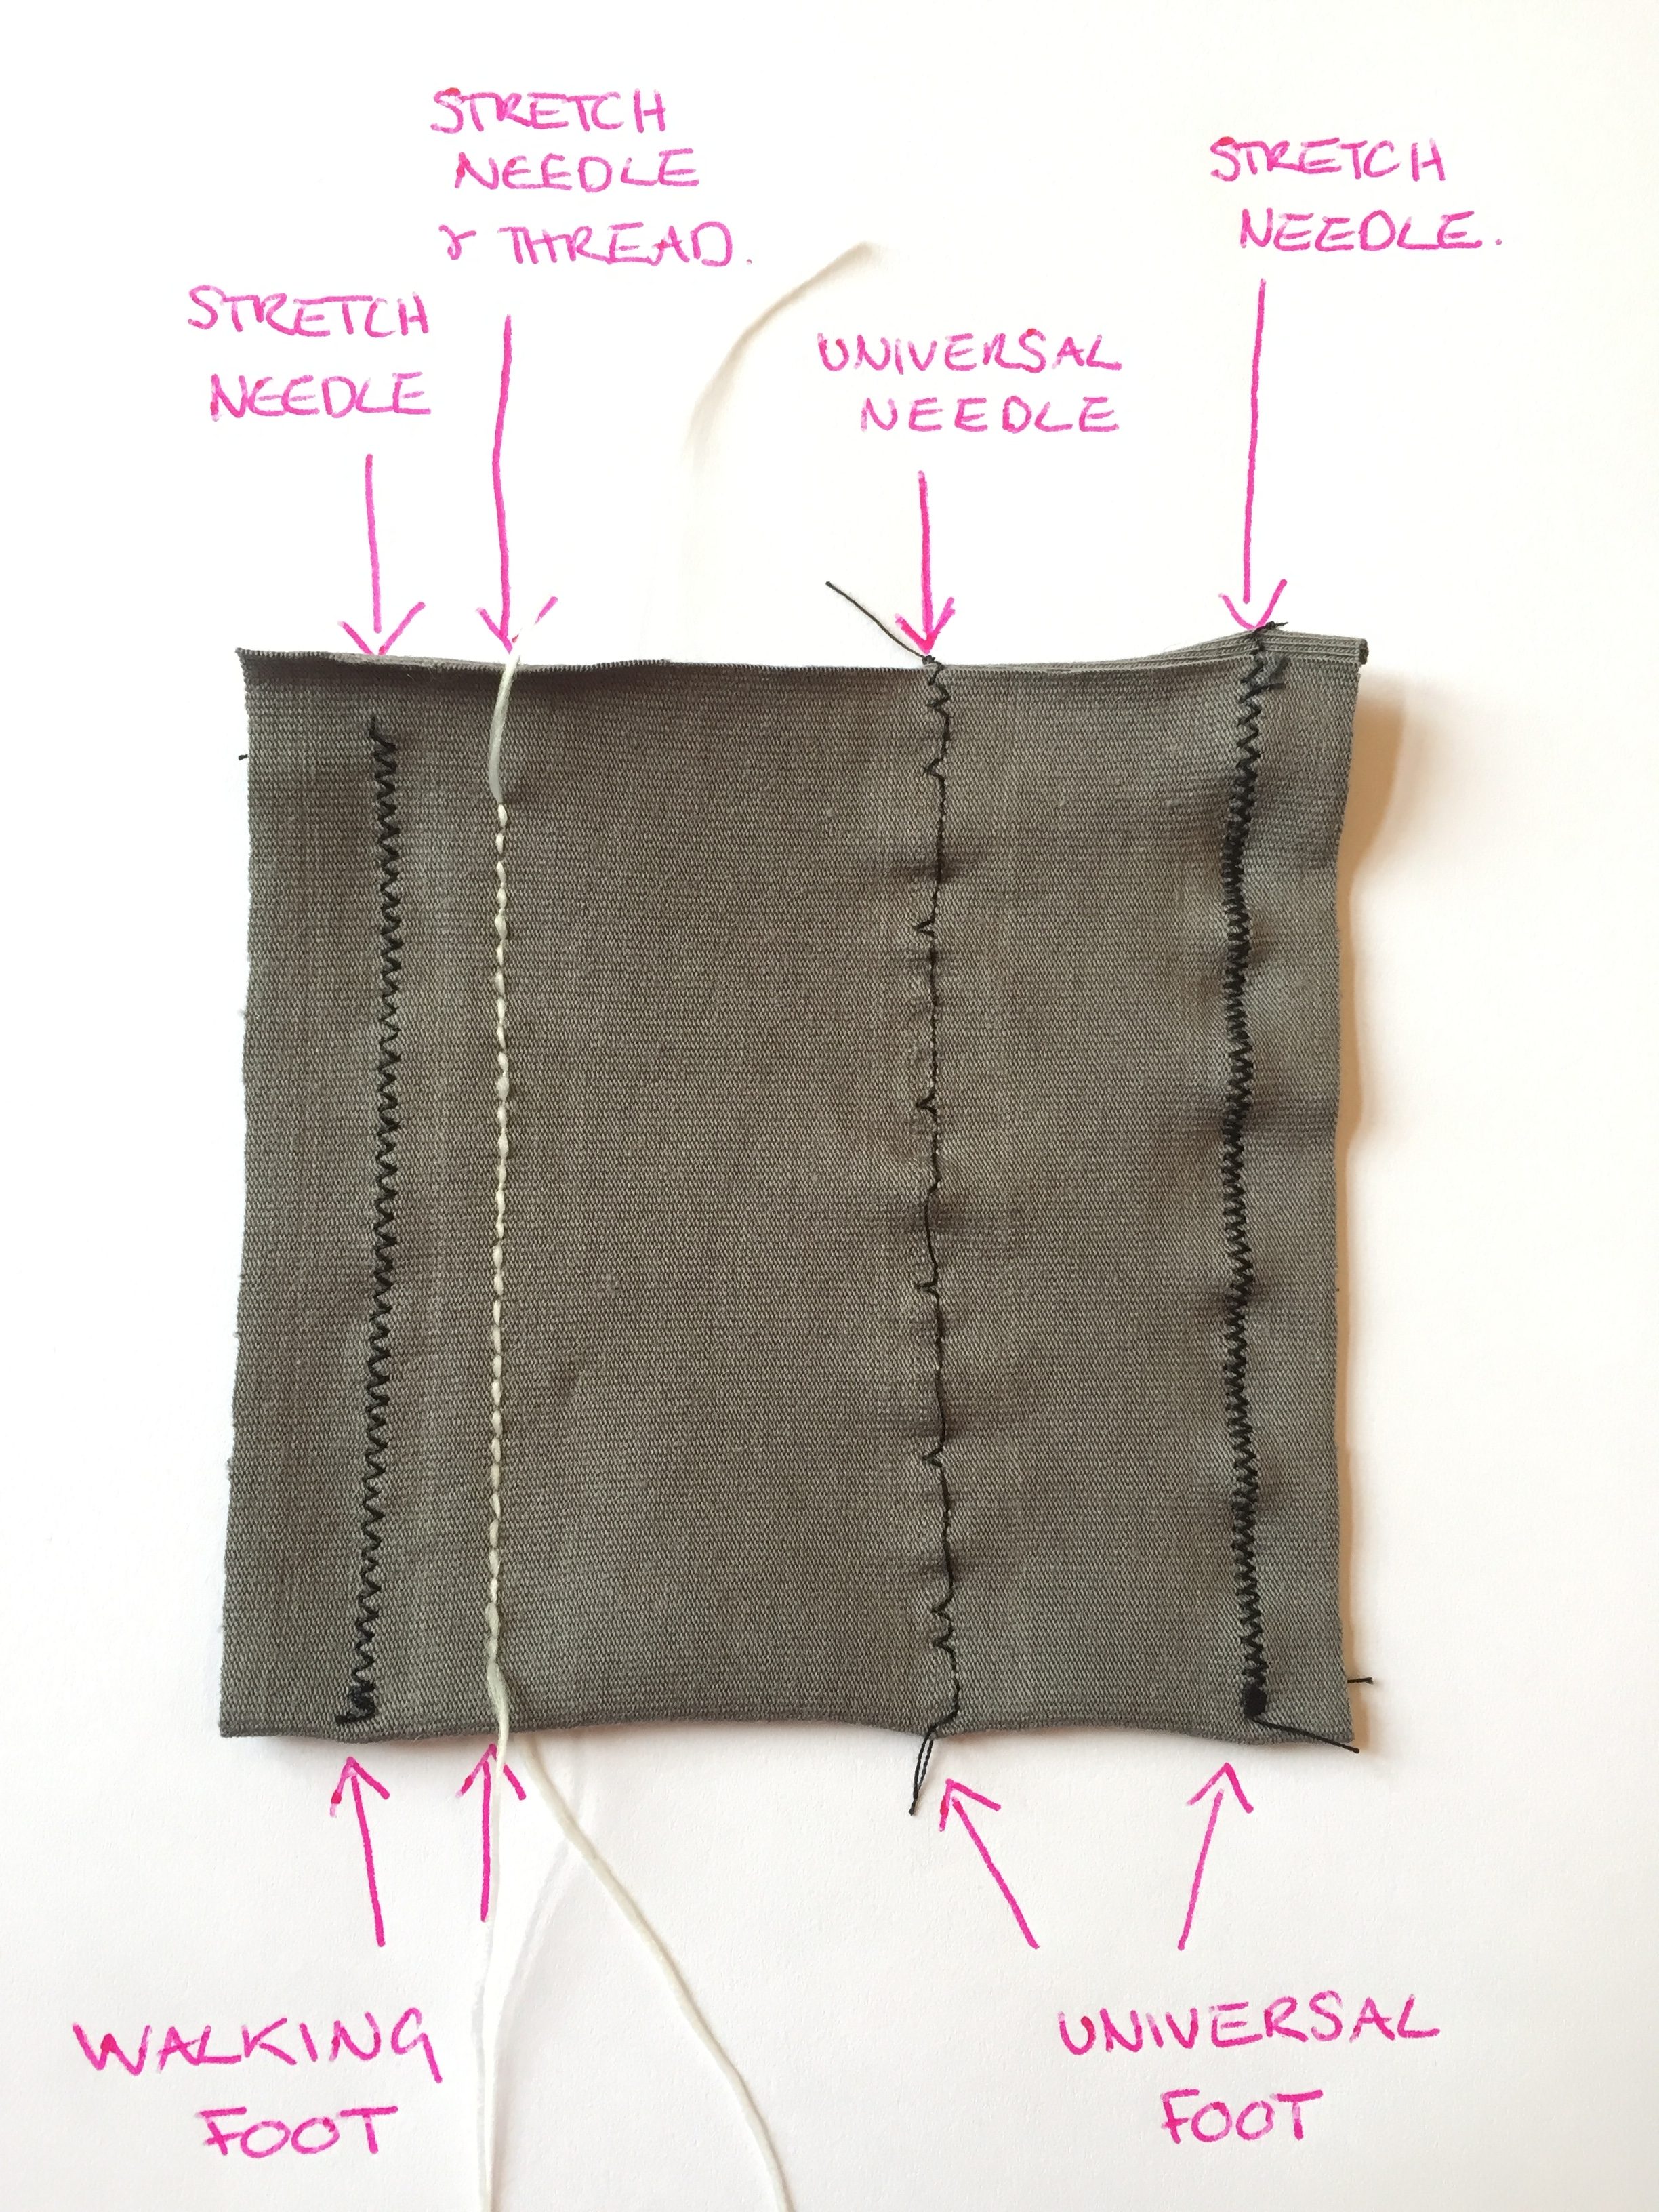 How to Sew with Stretch Fabrics